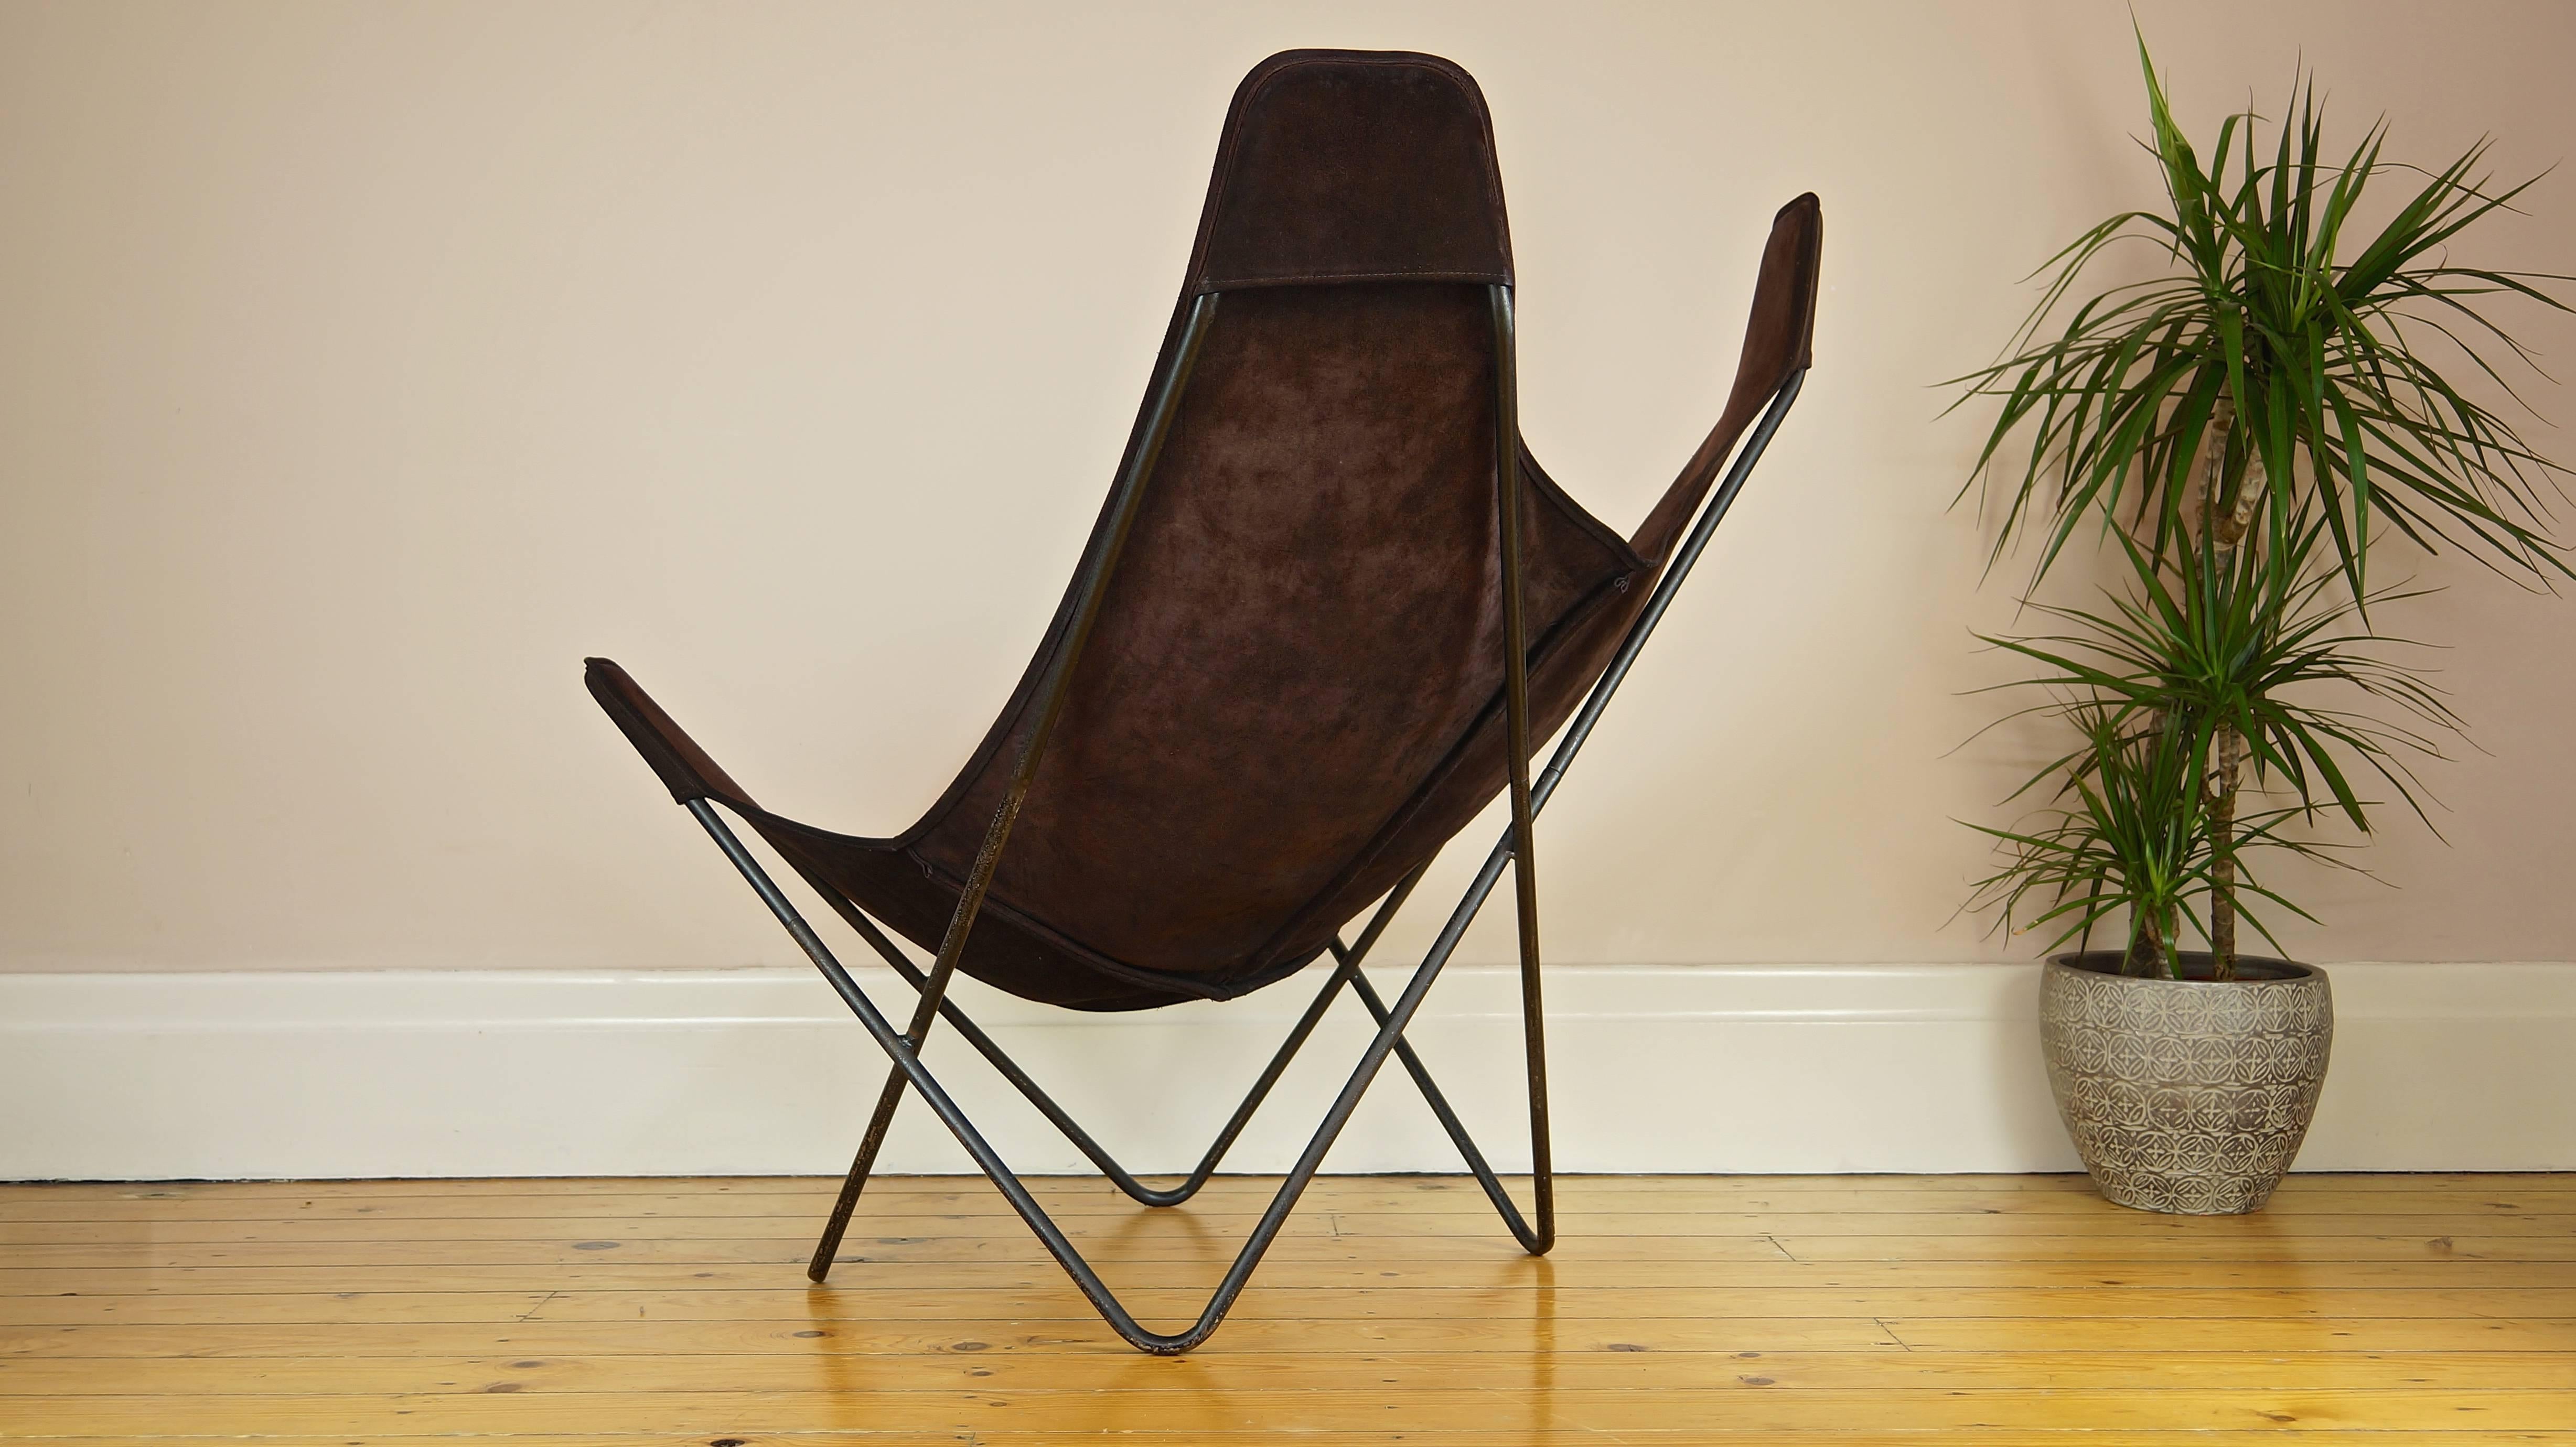 1970s Knoll Butterfly Chair by Jorge Ferrari-Hardoy, Suede Leather Sling Chair 1